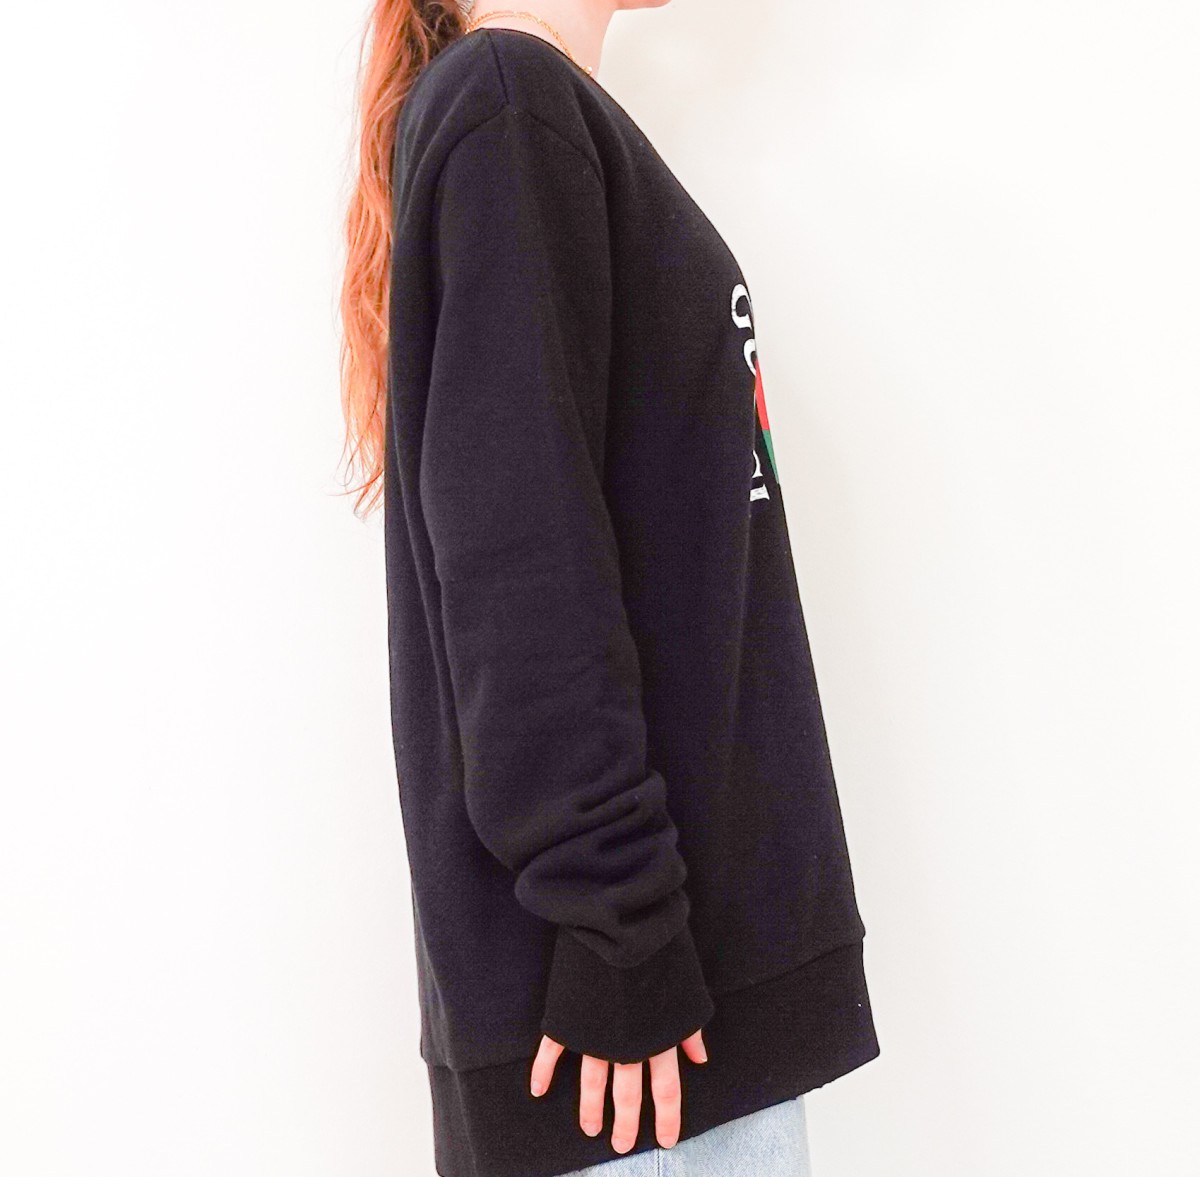 RELOVED AGAIN | Gucci black sweatshirt with logo XL RRP £760